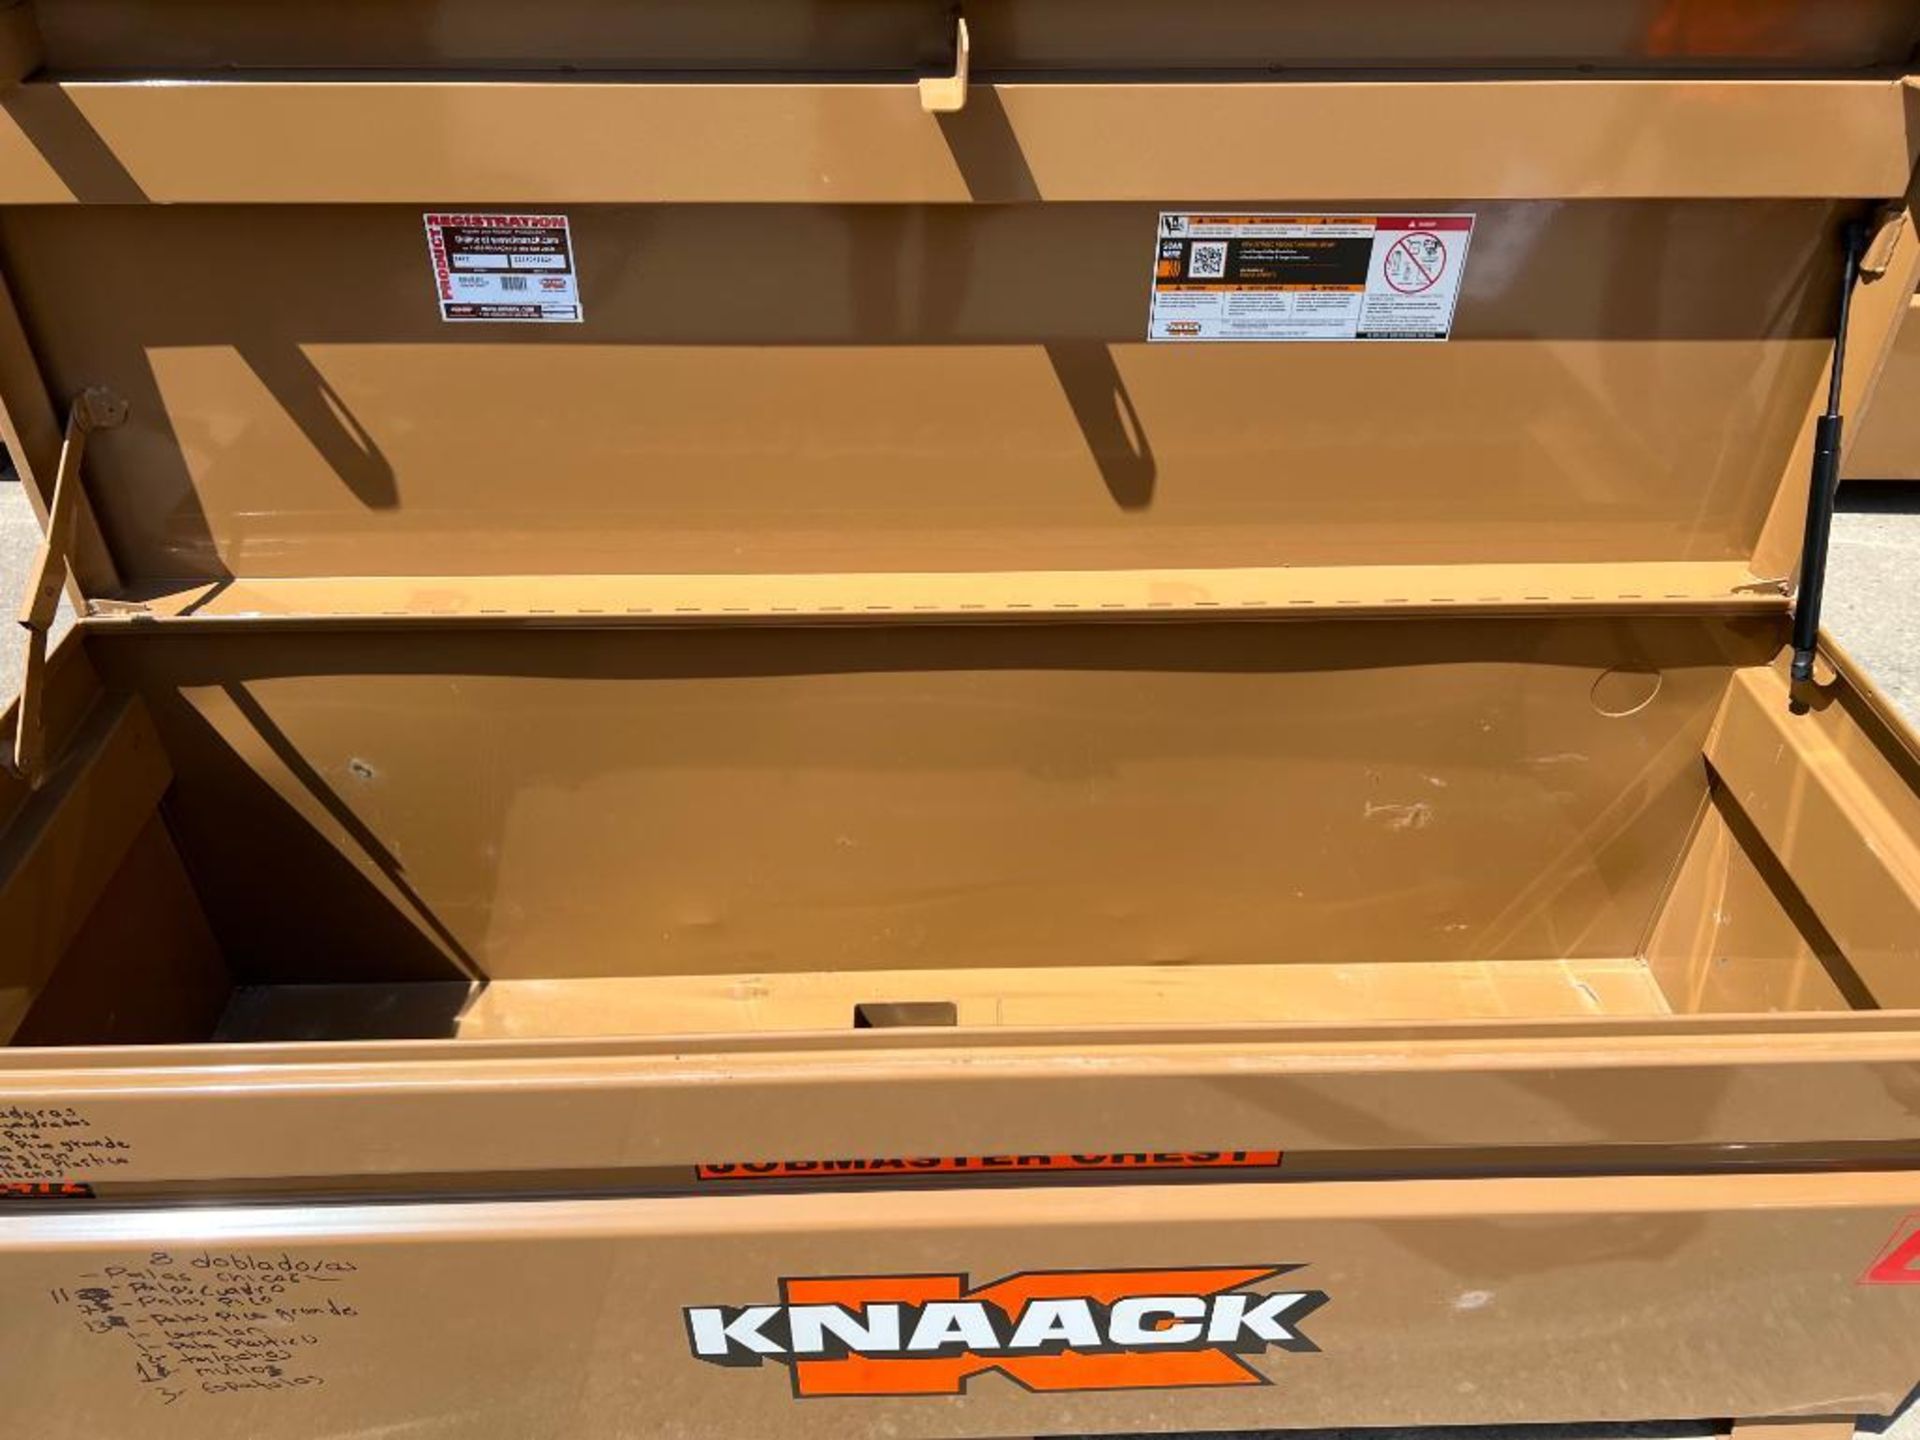 Knaack Jobmaster Chest, Model #2472, Serial #2211017521. Located in Mt. Pleasant, IA - Image 3 of 3